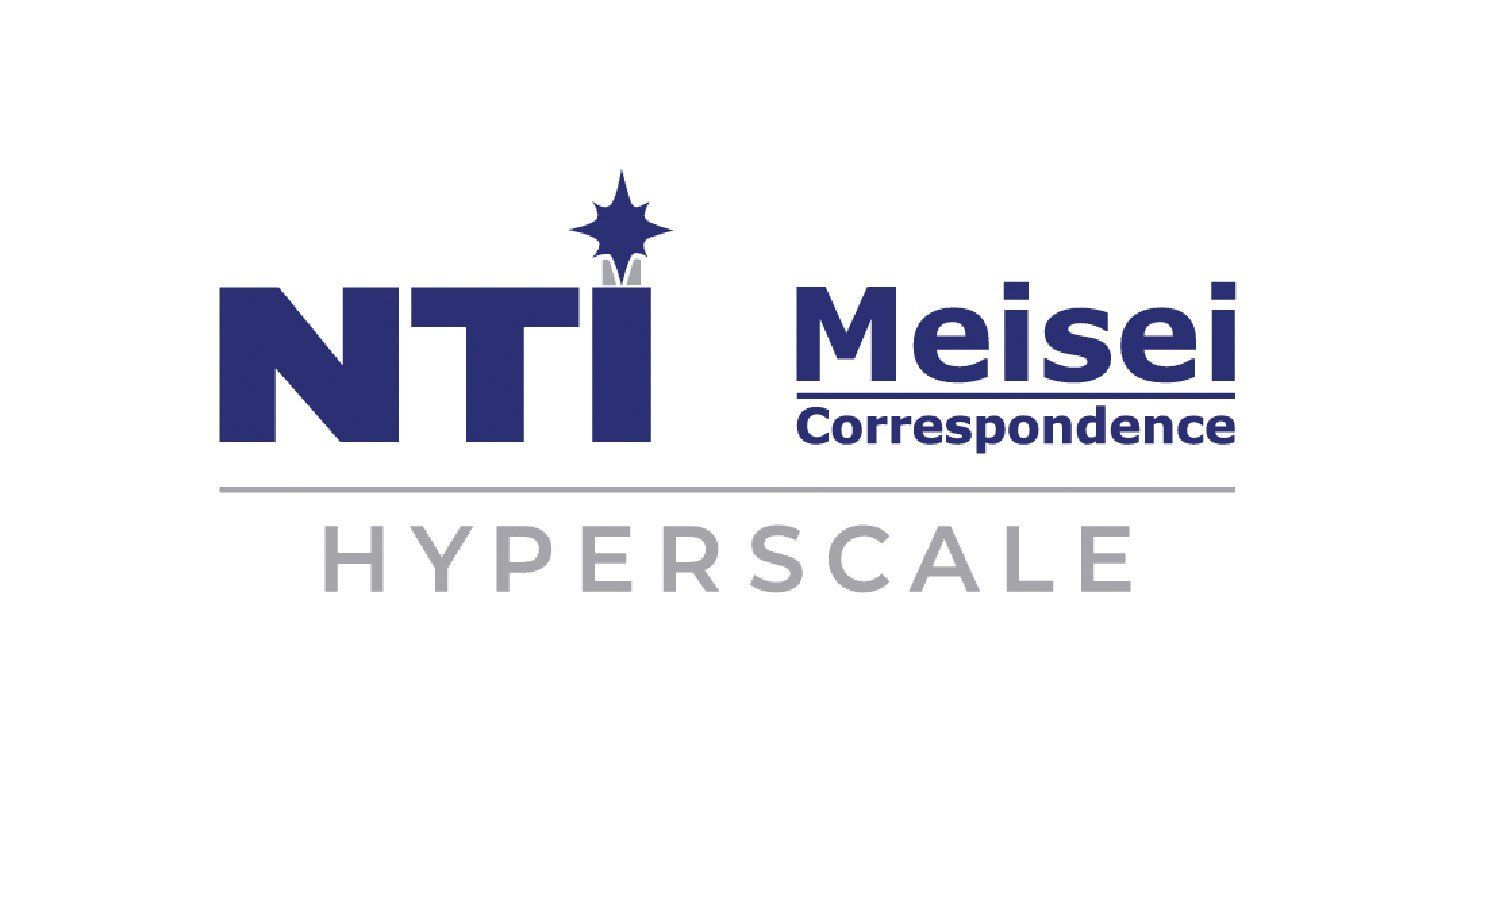 Joint NTI and Meisei Correspondence logo demonstrating our Hyperscale partnership